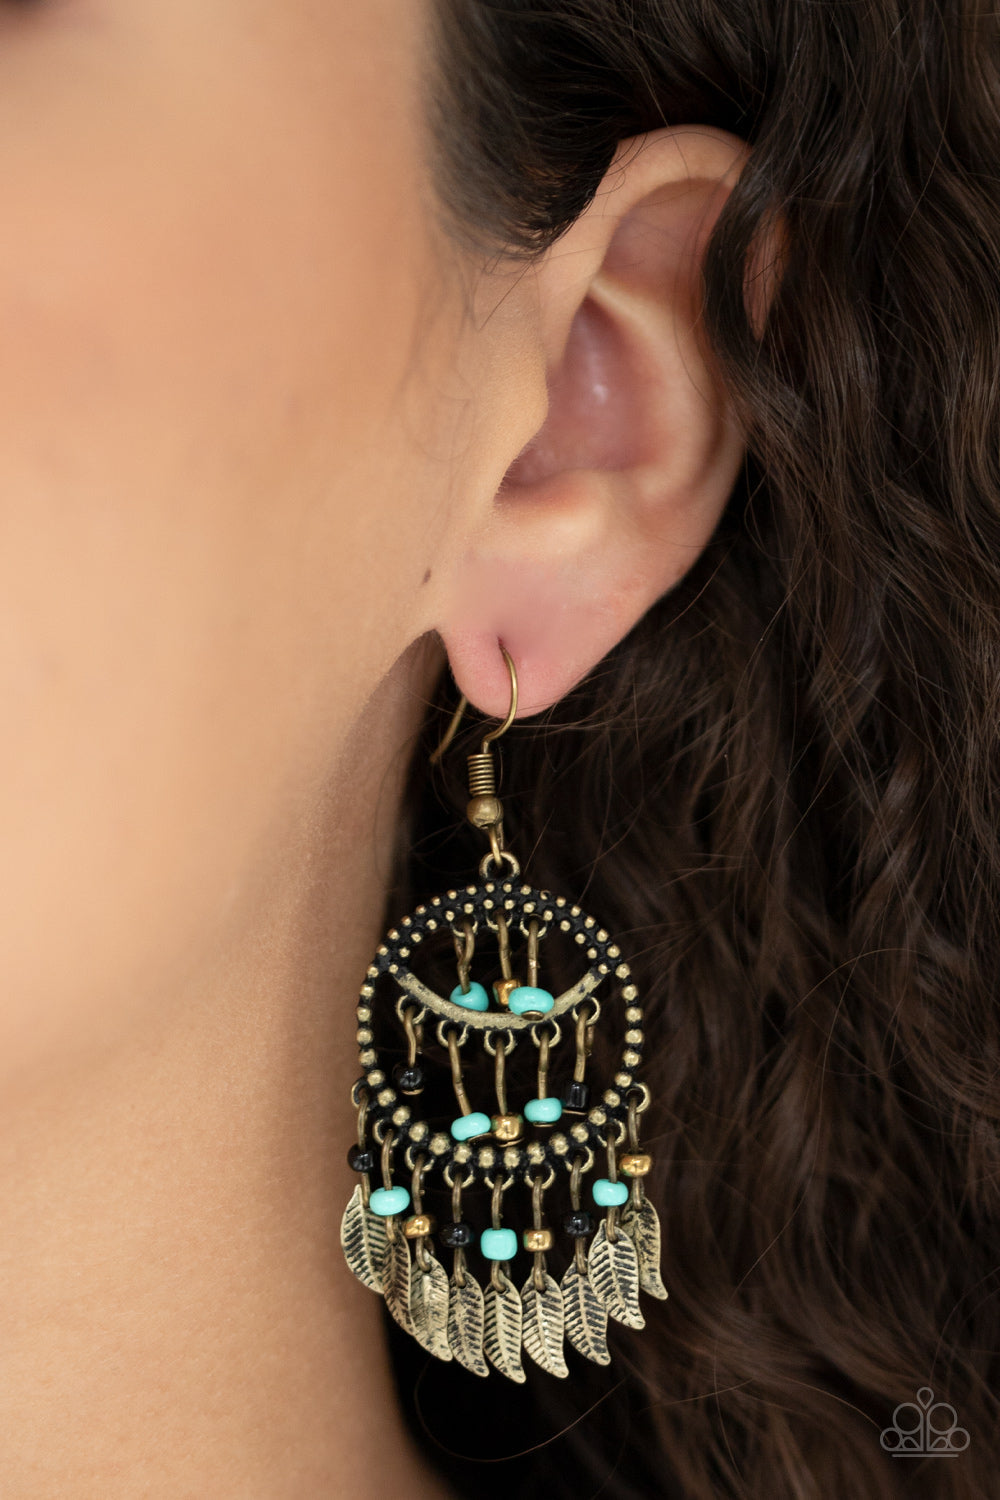 "HERBAL REMEDY" MULTI BLACK TURQUOISE BLUE FEATHER DREAM CATCHER BRASS EARRINGS - Gtdazzlequeen